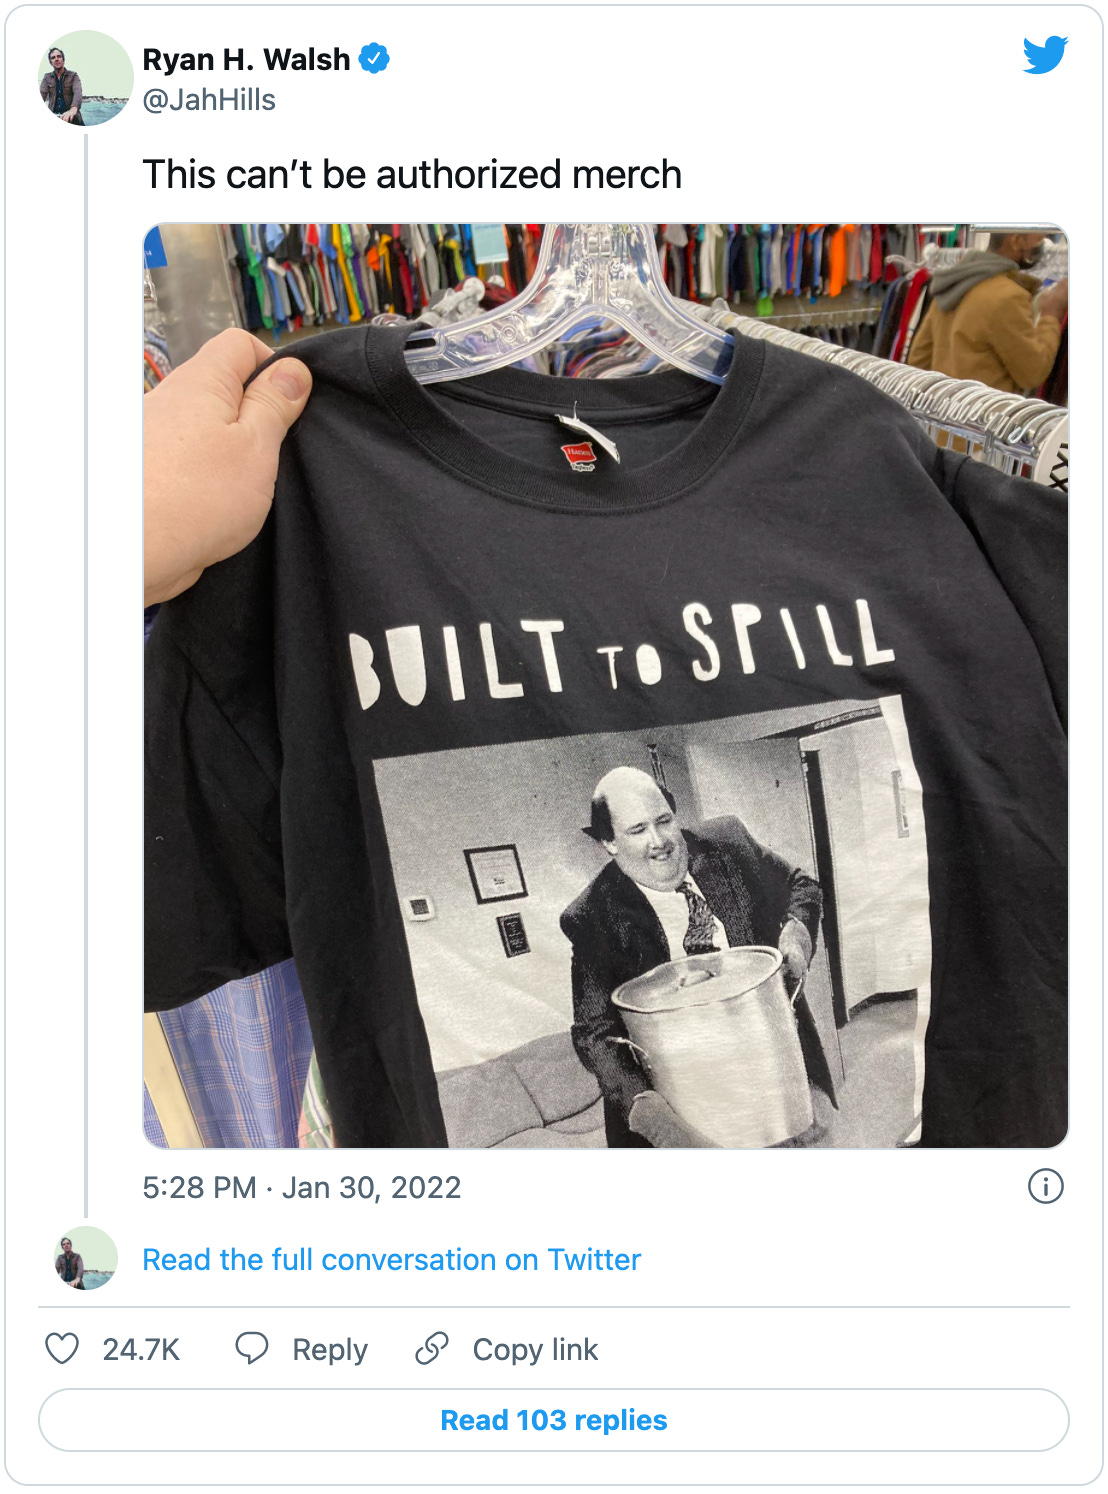 Ryan H. Walsh tweets: “This can’t be authorized merch” with a picture of a t-shirt that says “Built to Spill” above a screenshot of Kevin from The Office about to drop his giant pot of chili.